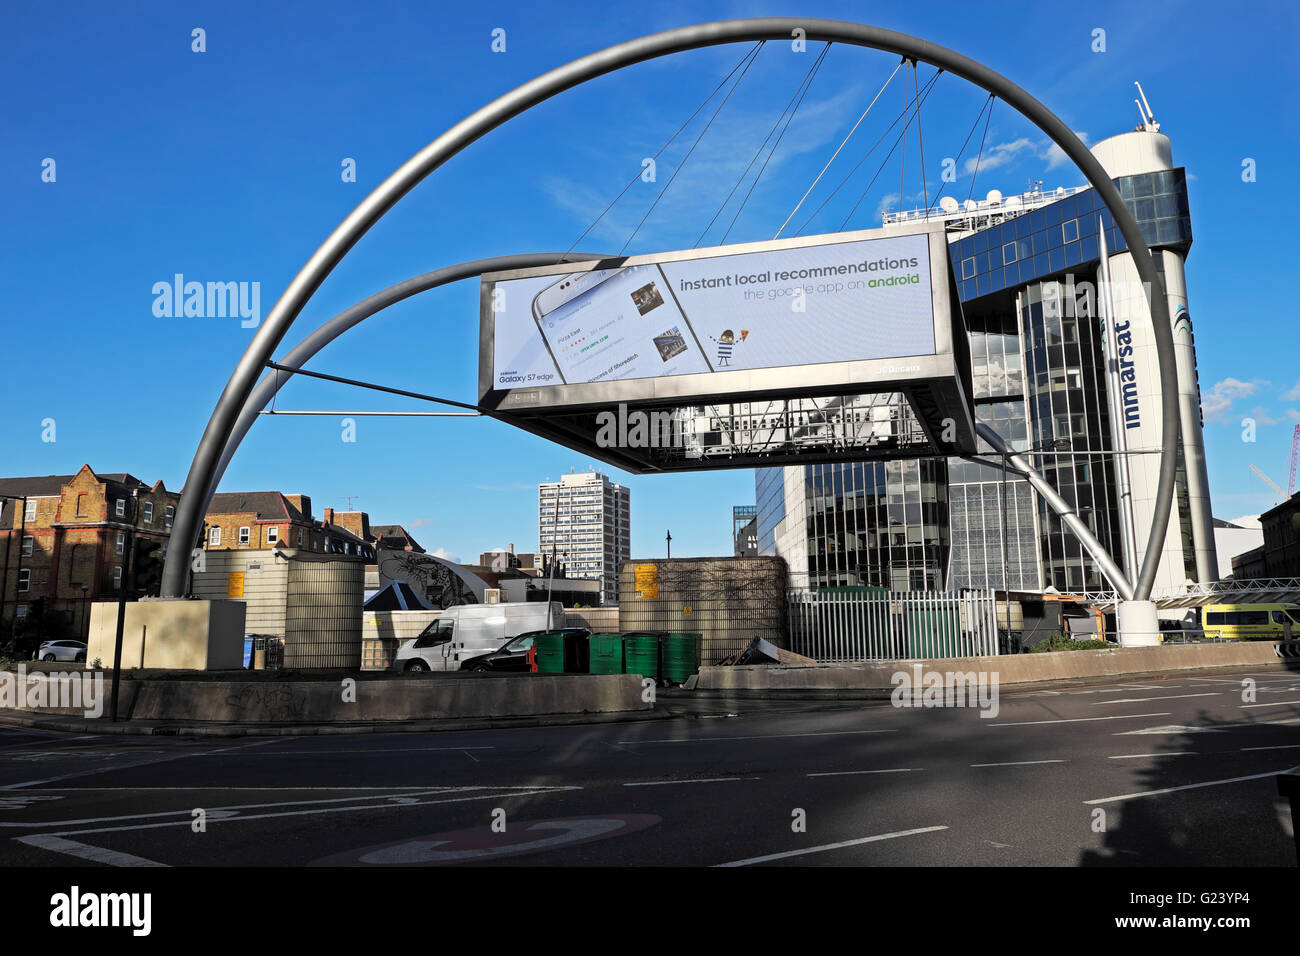 Android mobild phone advertisement advert on Silicon Roundabout structure and Inmarsat sign on building in Shoreditch, East London UK    KATHY DEWITT Stock Photo